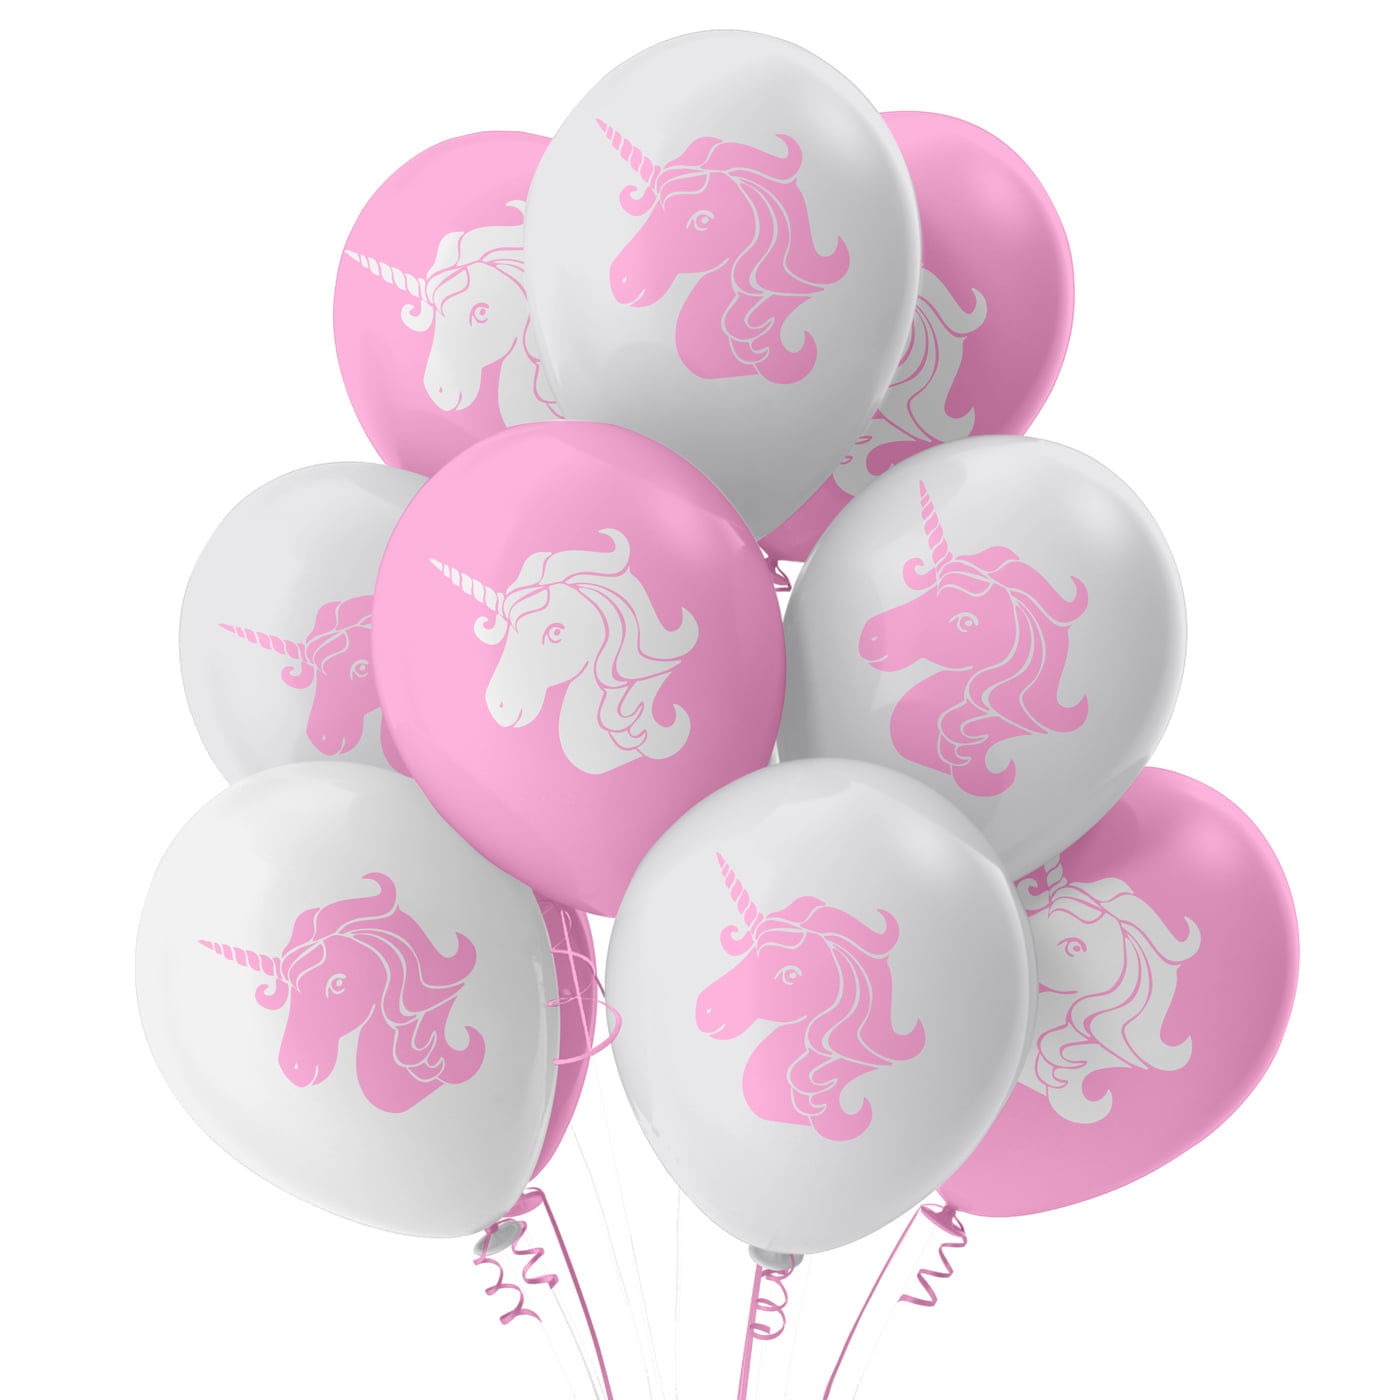 The Magic Balloons Store- Printed Latex Unicorn Balloons-pack of 50